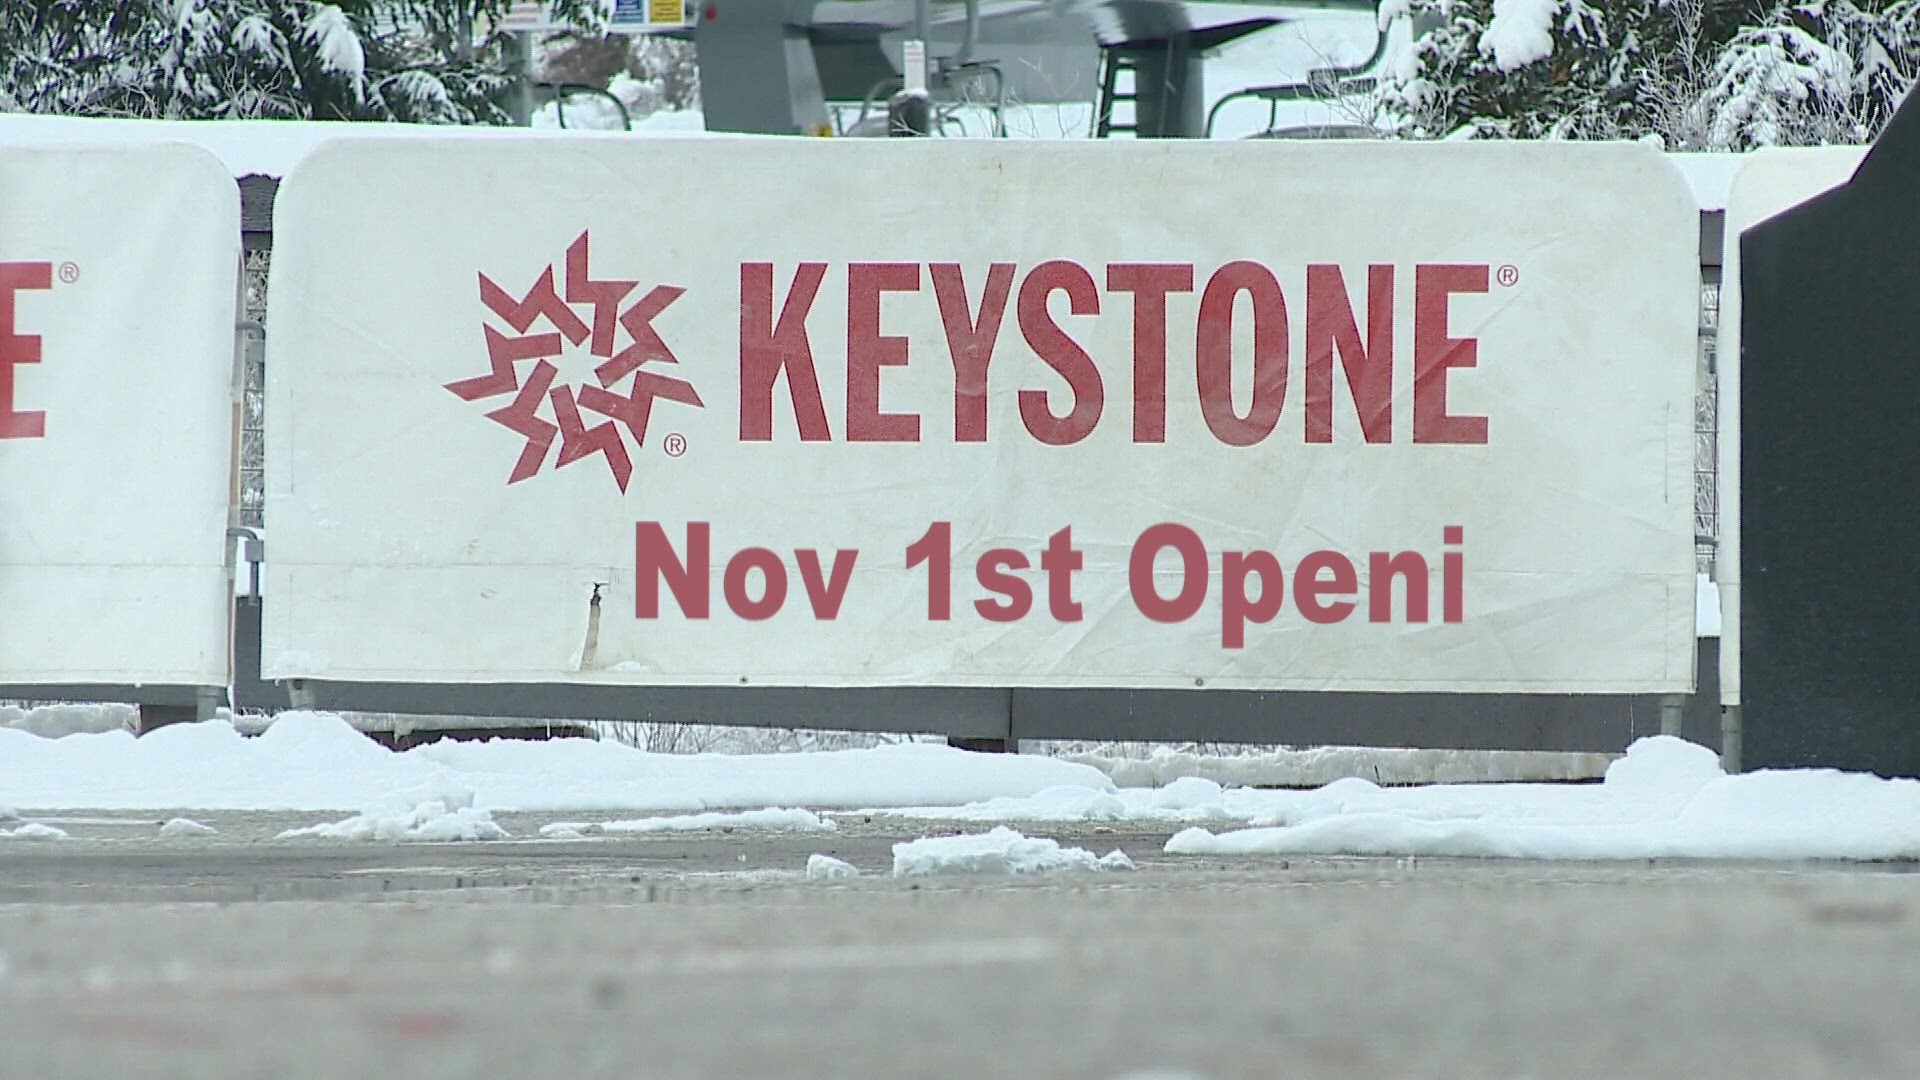 Keystone Resort announced Monday that it will open for the 2023/24 season on Nov. 1, after a weekend storm dumped about 14 inches of new snow on the ski area.